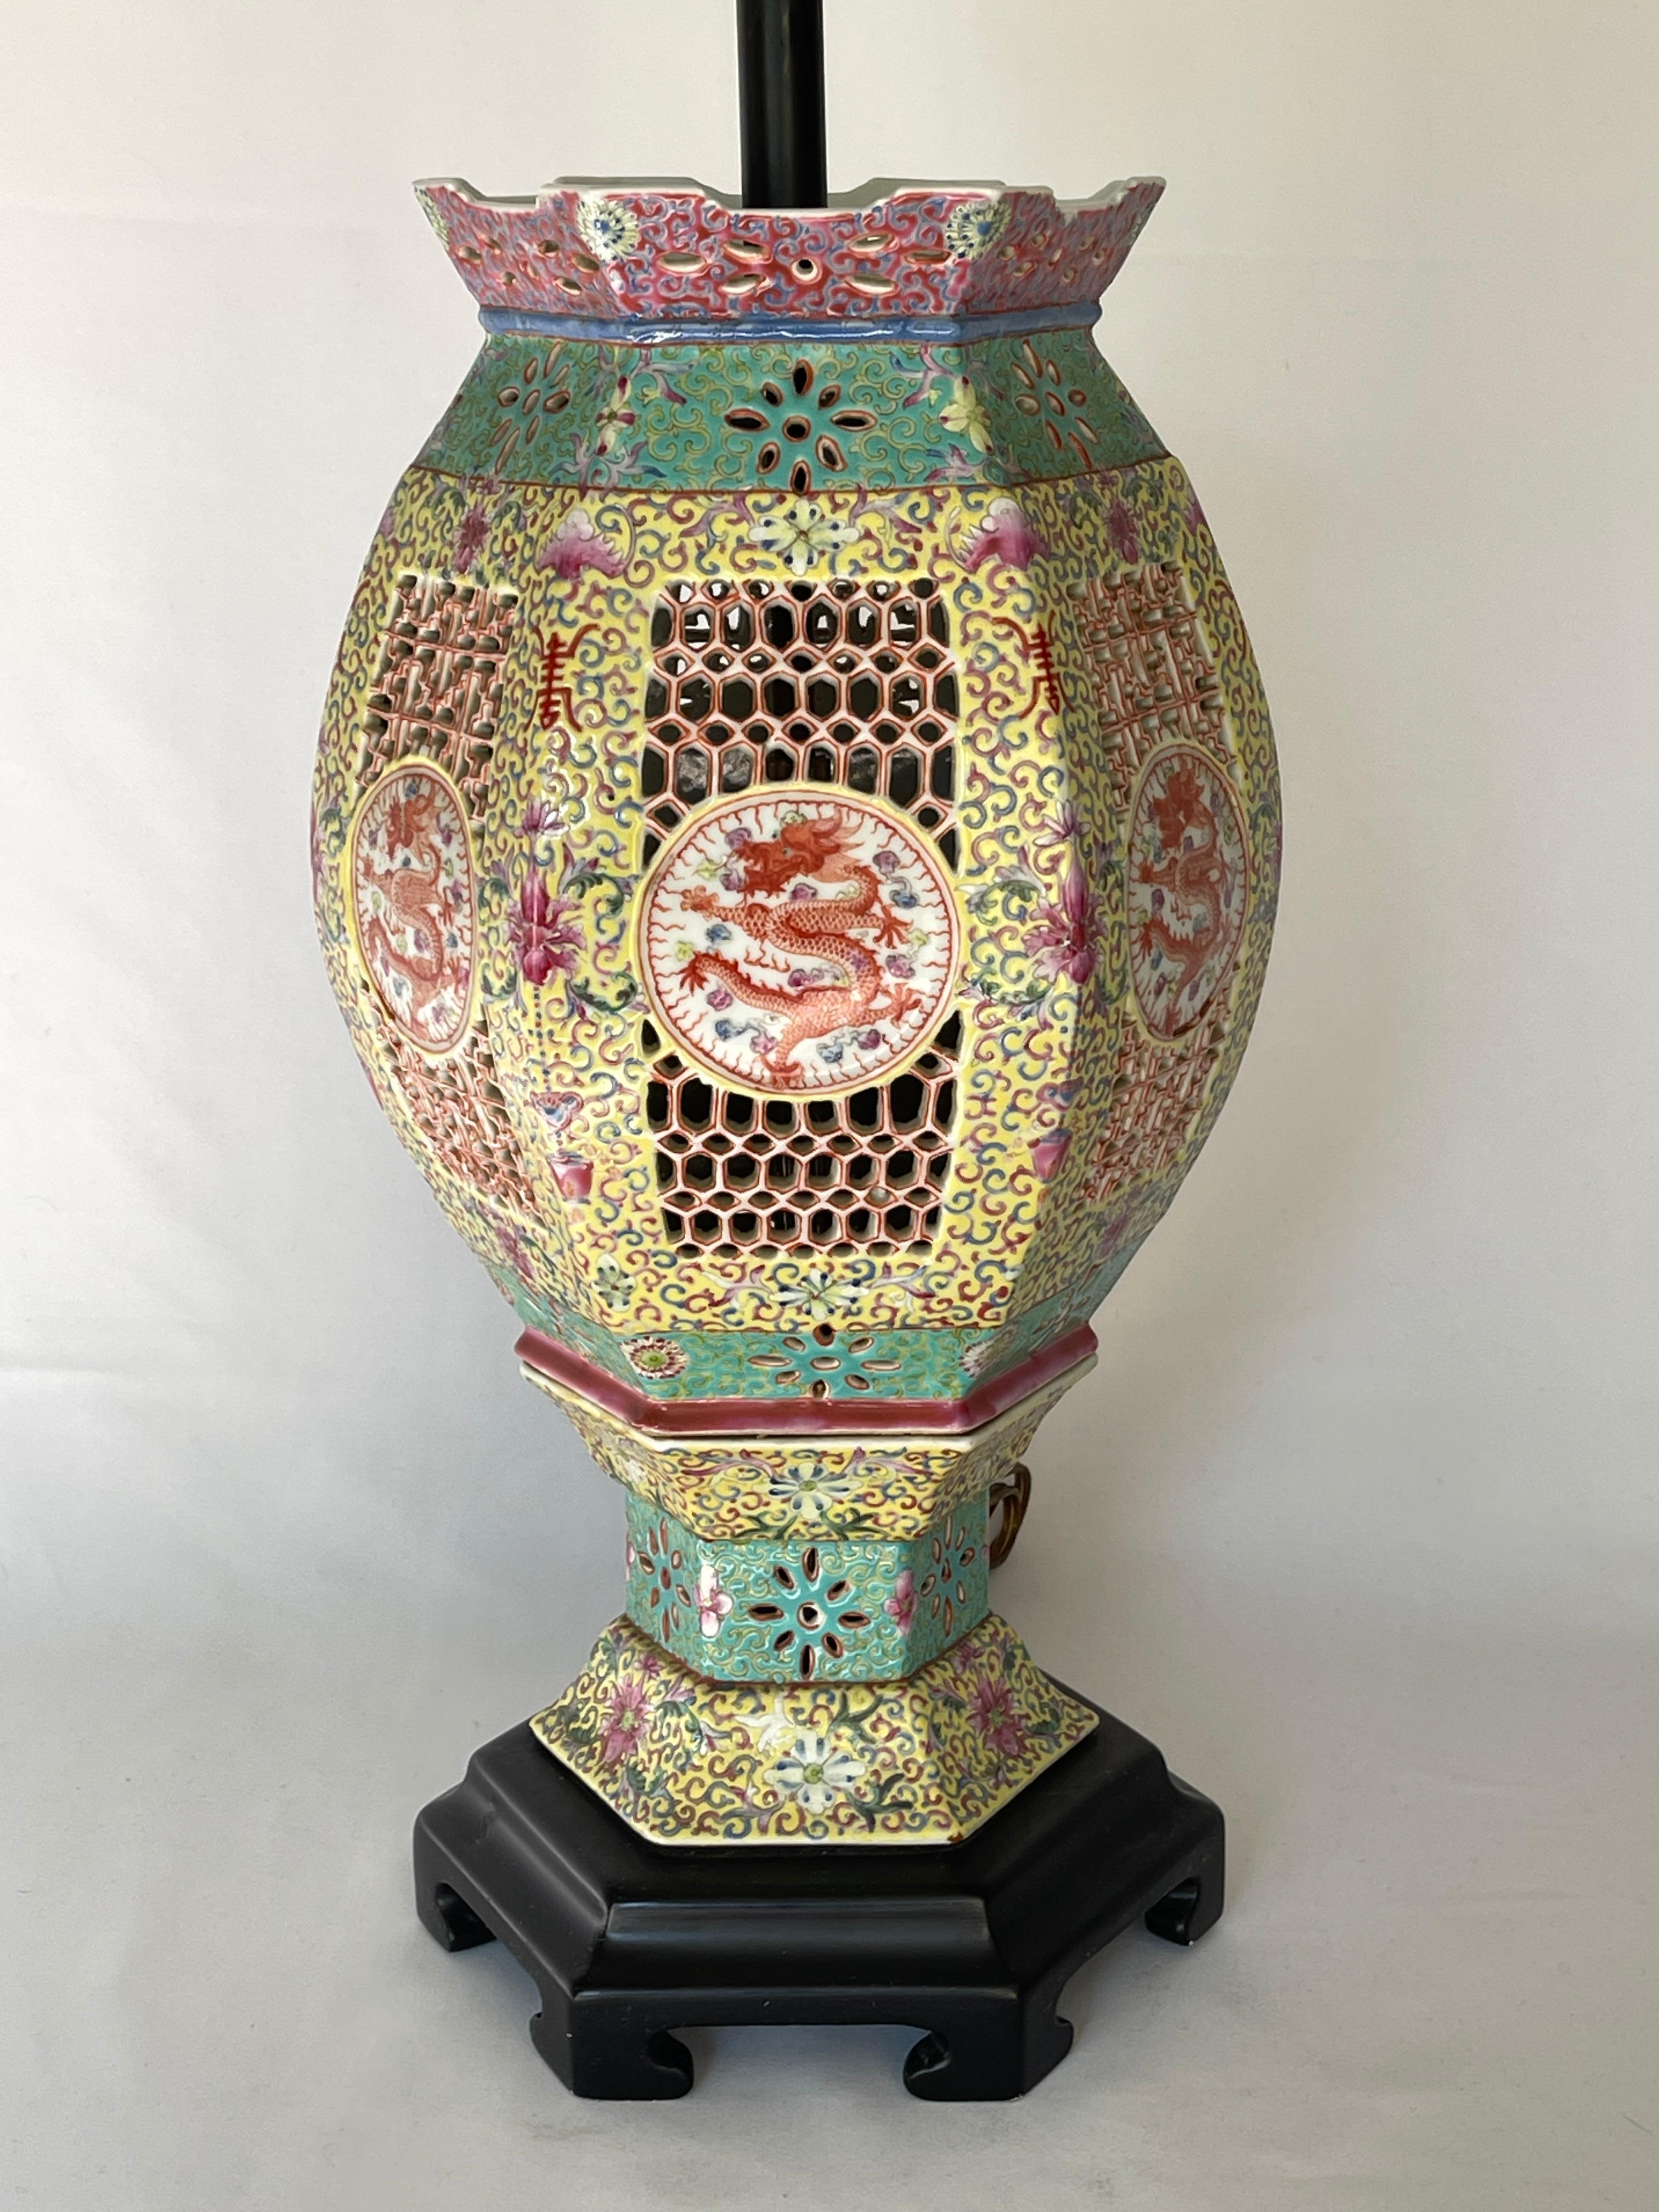 Late 19th- Early 20th century Chinese famille rose porcelain reticulated wedding lantern lamp with central Imperial Dragon motif medallions.
The lamp is composed of the porcelain lantern set on a dark hardwood hexagonal form base. Solid brass